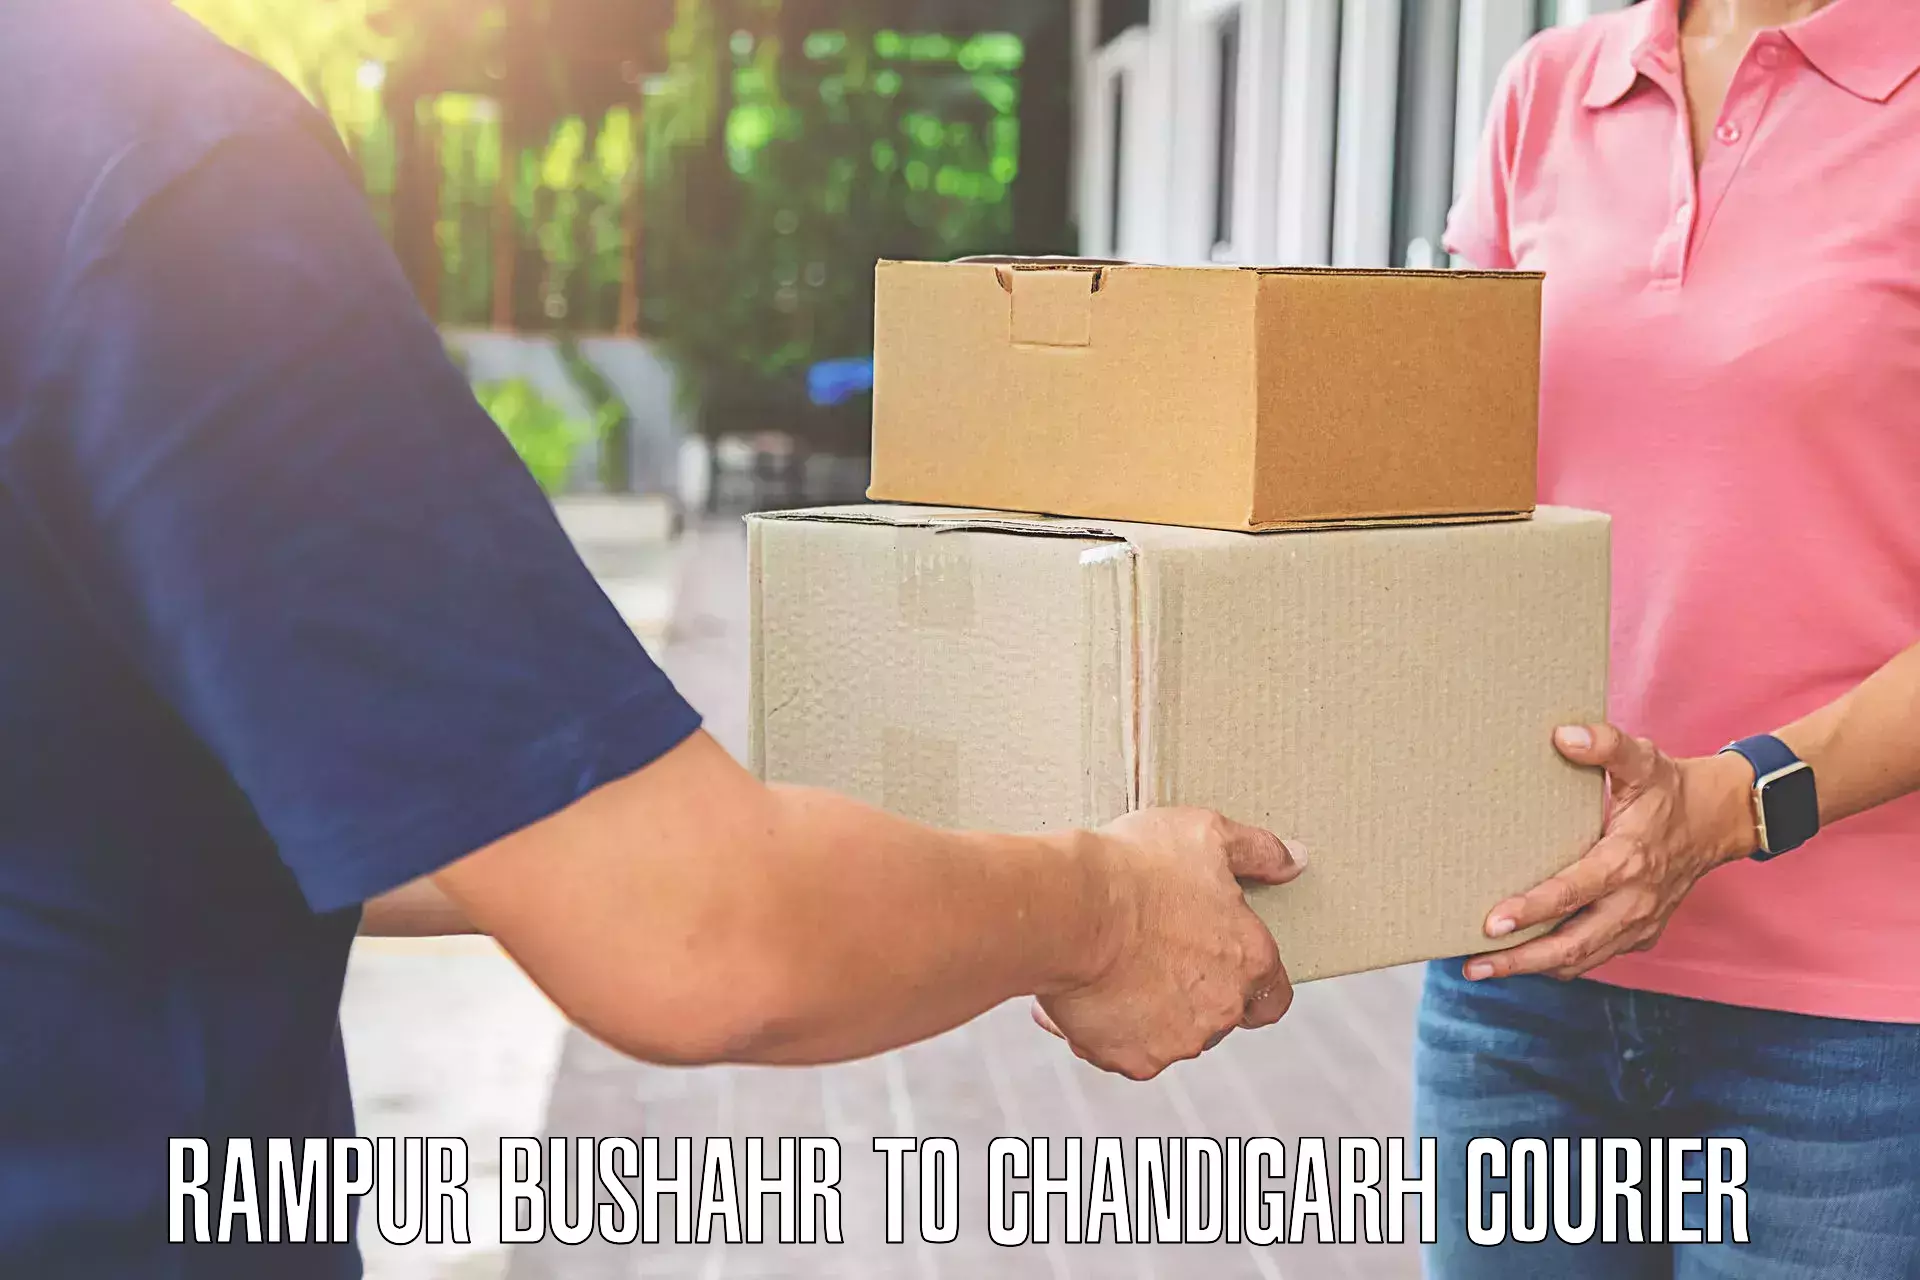 Luggage delivery providers Rampur Bushahr to Chandigarh